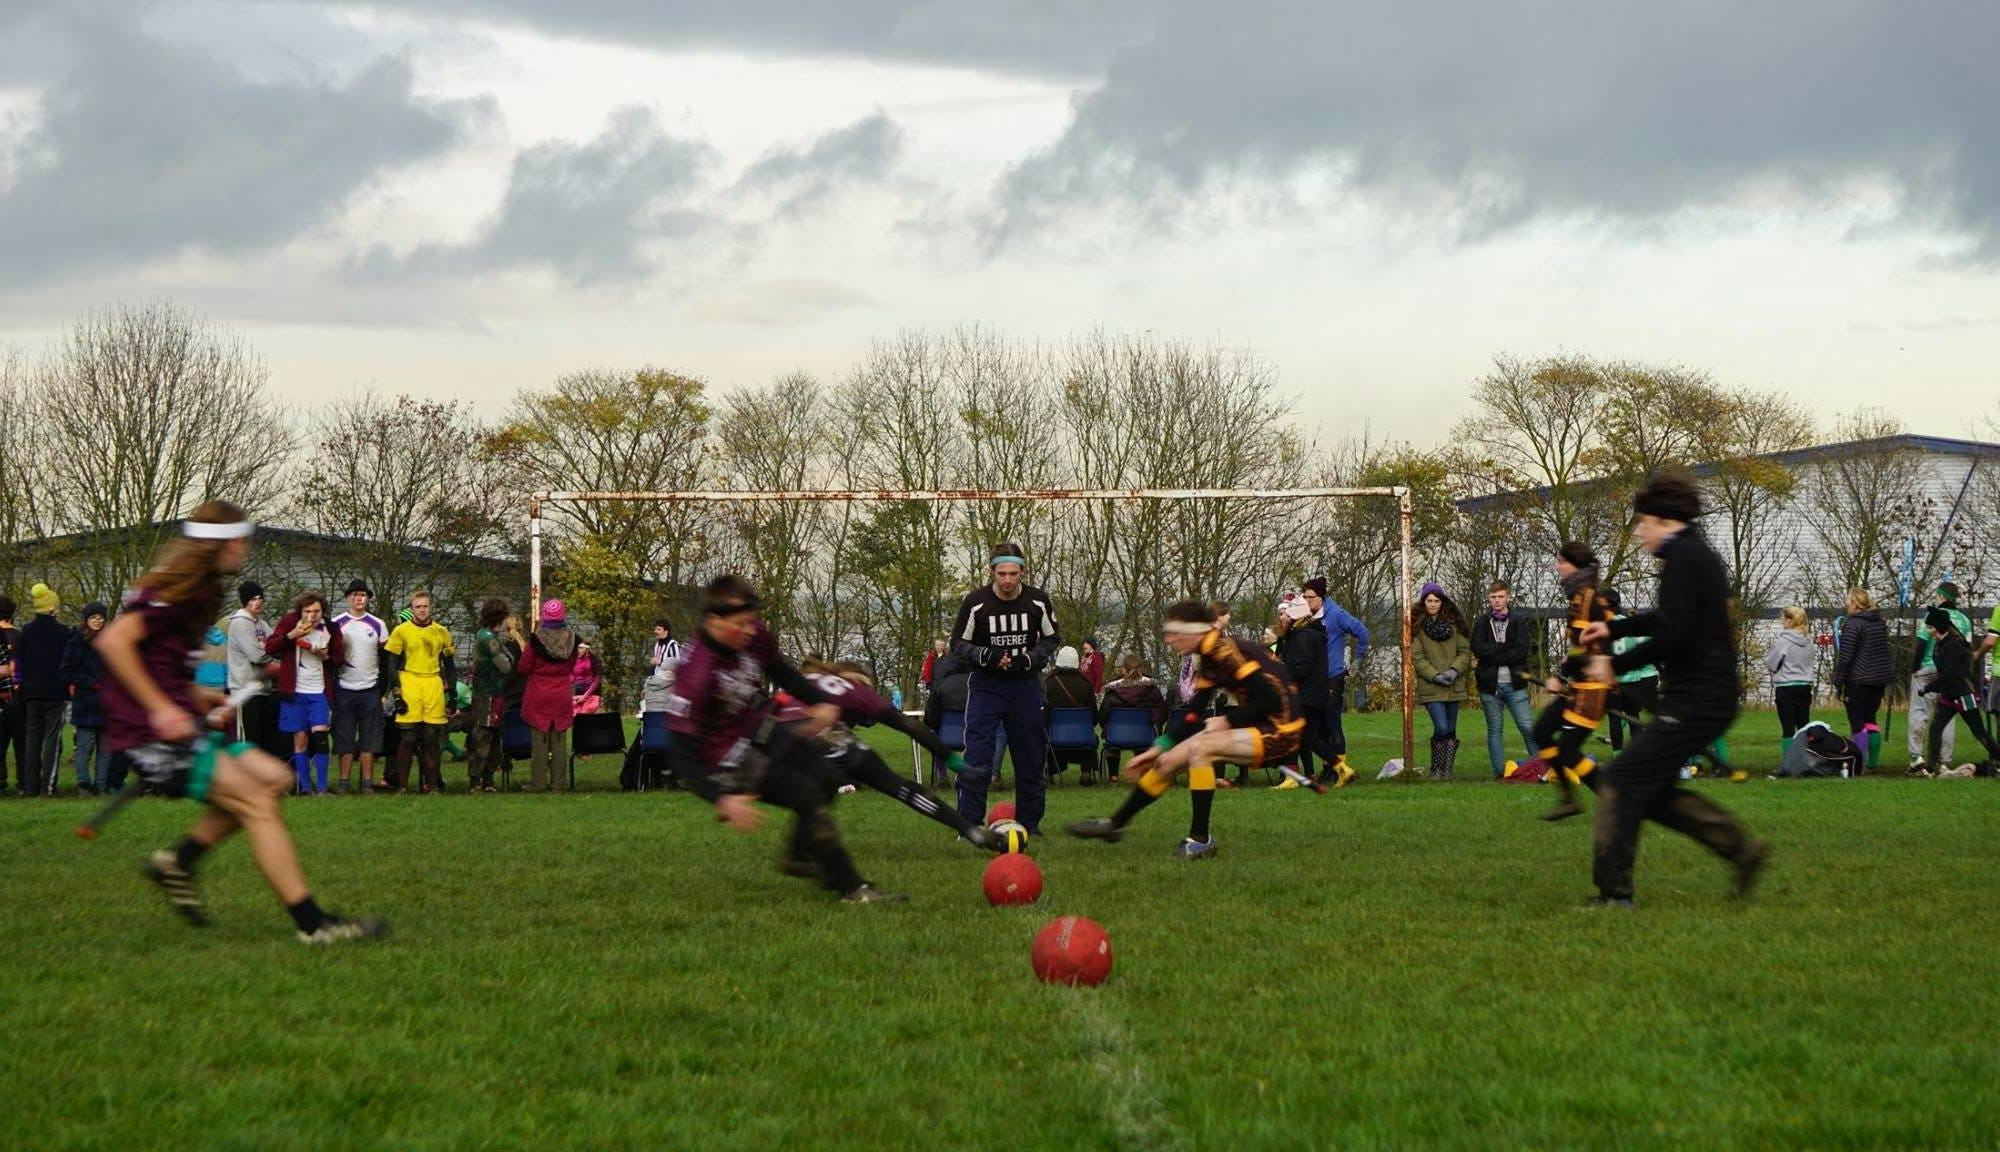 Two teams run towards the halfway line to begin a game of Quidditch